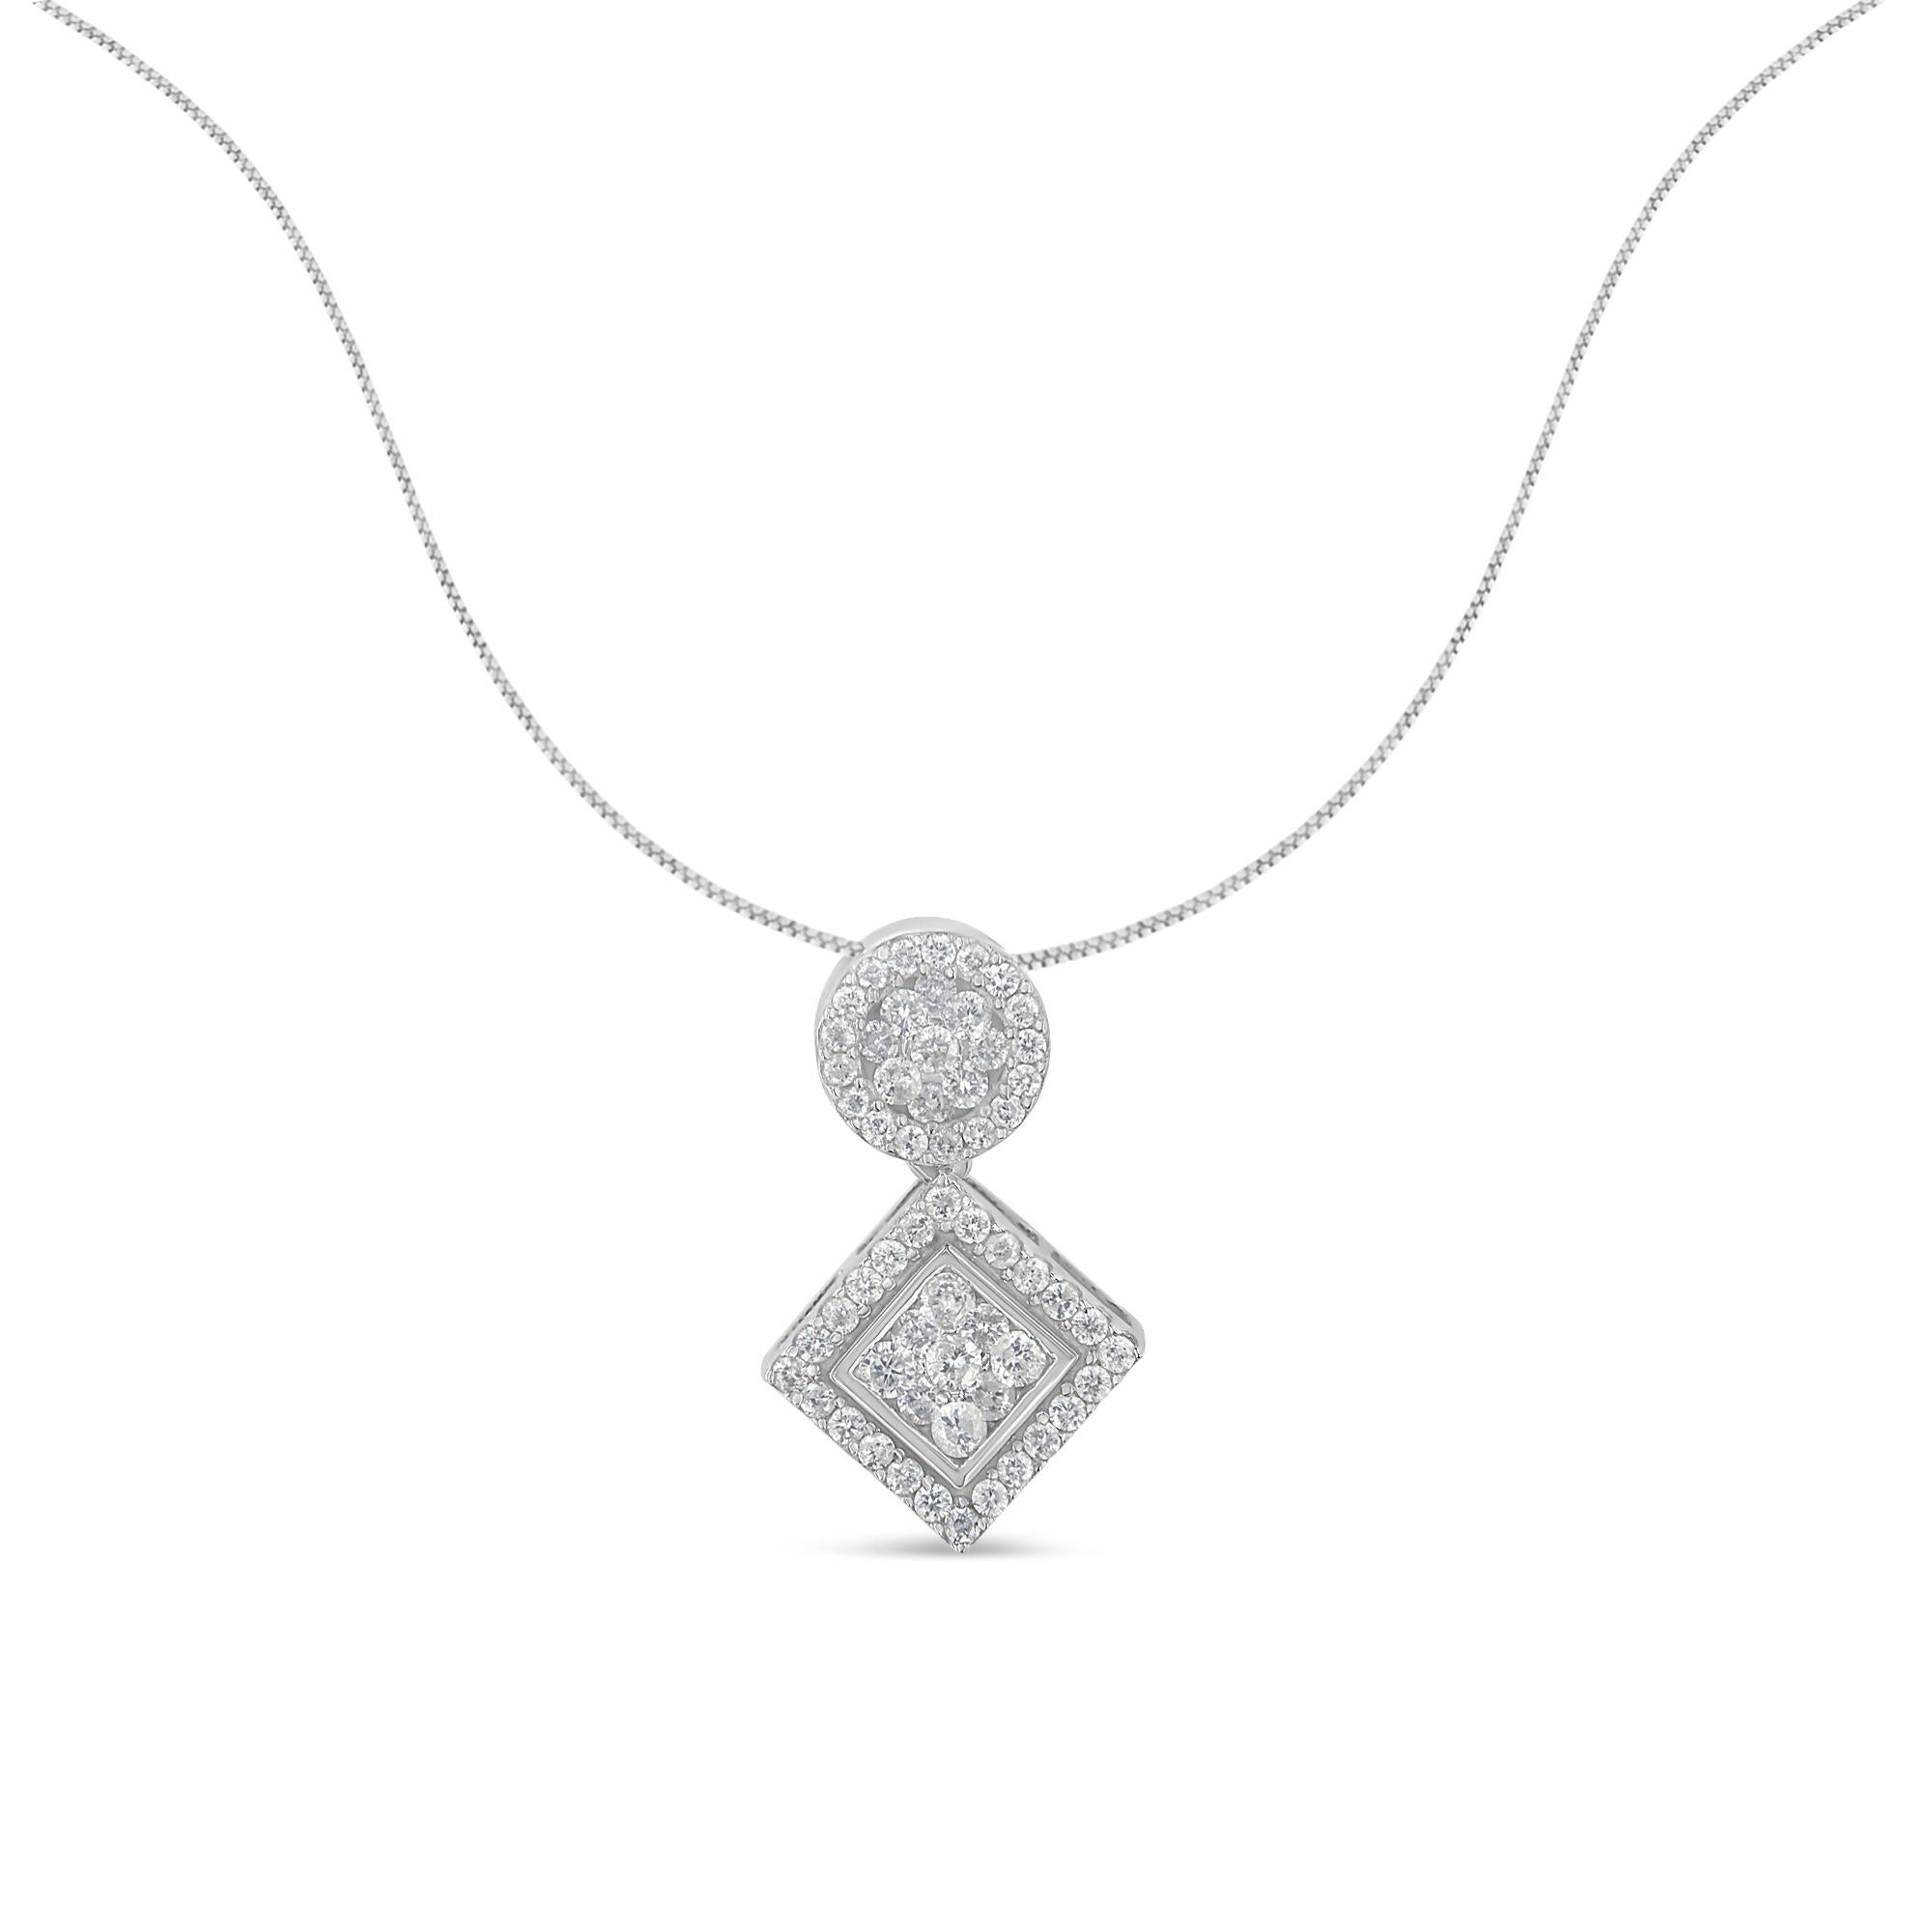 A diamond pendant necklace featuring a geometric design with a round and square clusters of diamonds. This striking necklace is crafted in 14 karat white gold and has a total diamond weight of 1 carat. This beautiful necklace includes 18” box chain